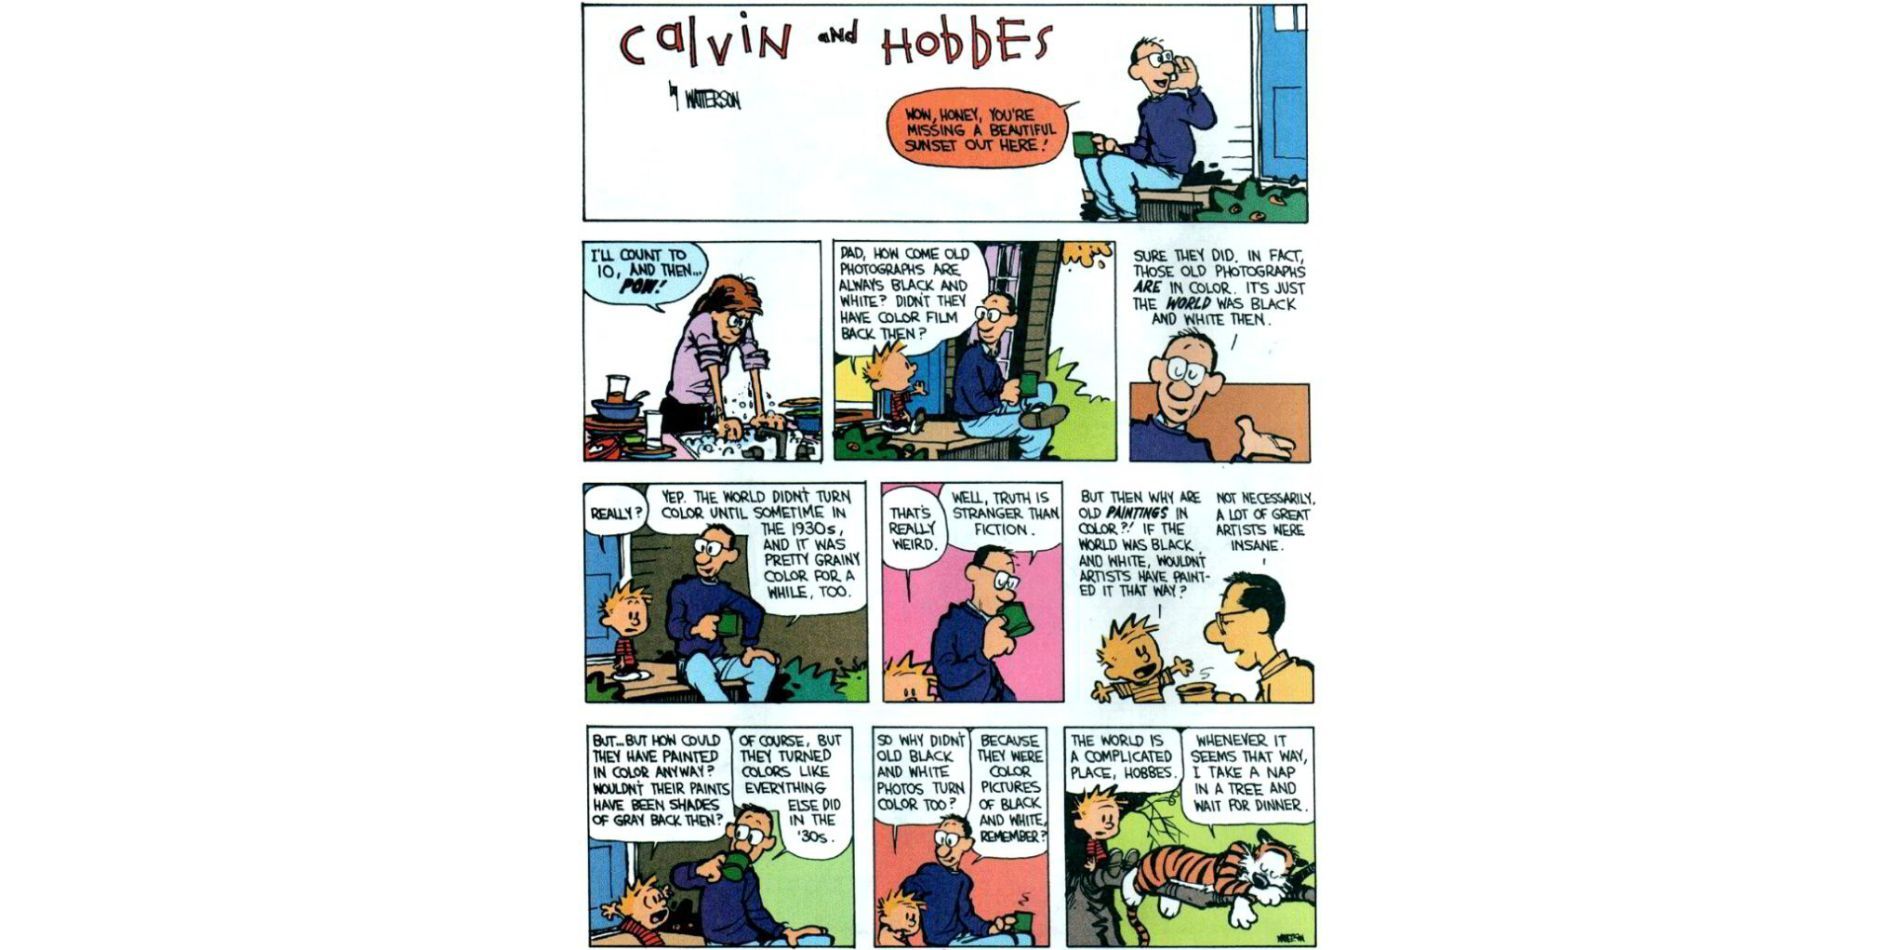 Calvin and hobbes the world is complicated